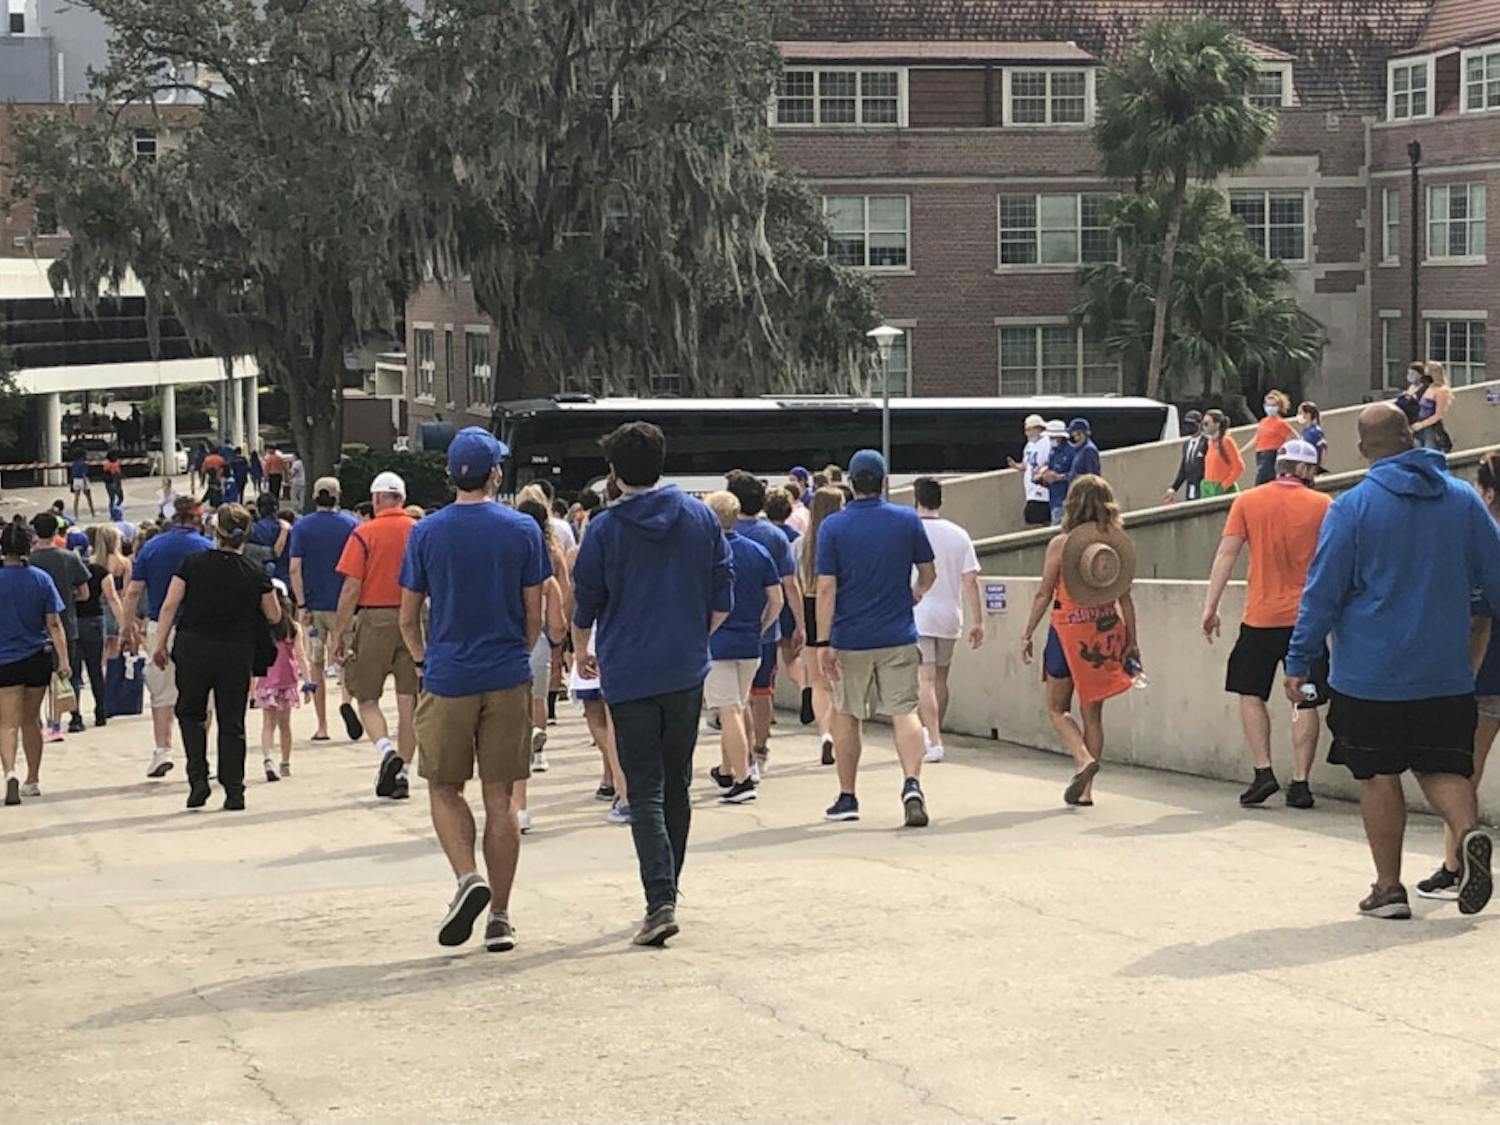 Social distancing was scarce as fans exited the stadium after Saturday's win over the Gamecocks.